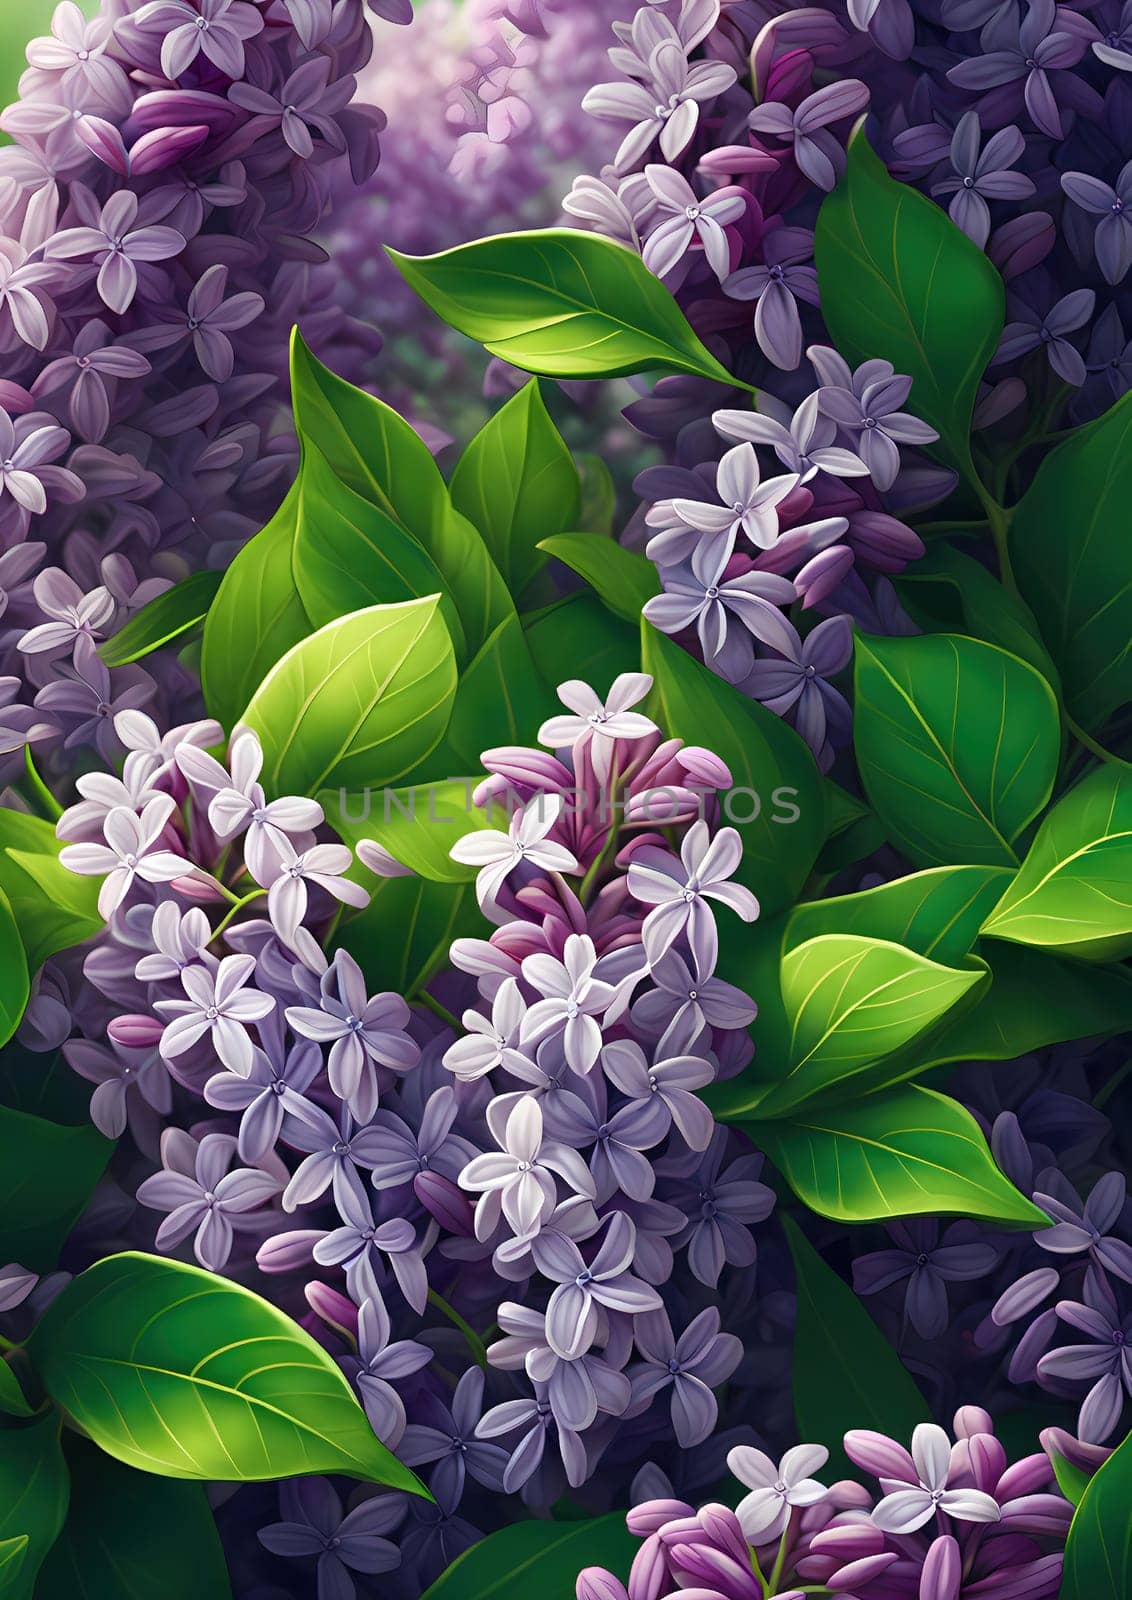 lilac flowers blooming in a field of green leaves, 8k, rich colors, as an offering to Zeus, beautiful wallpaper, by rostik924